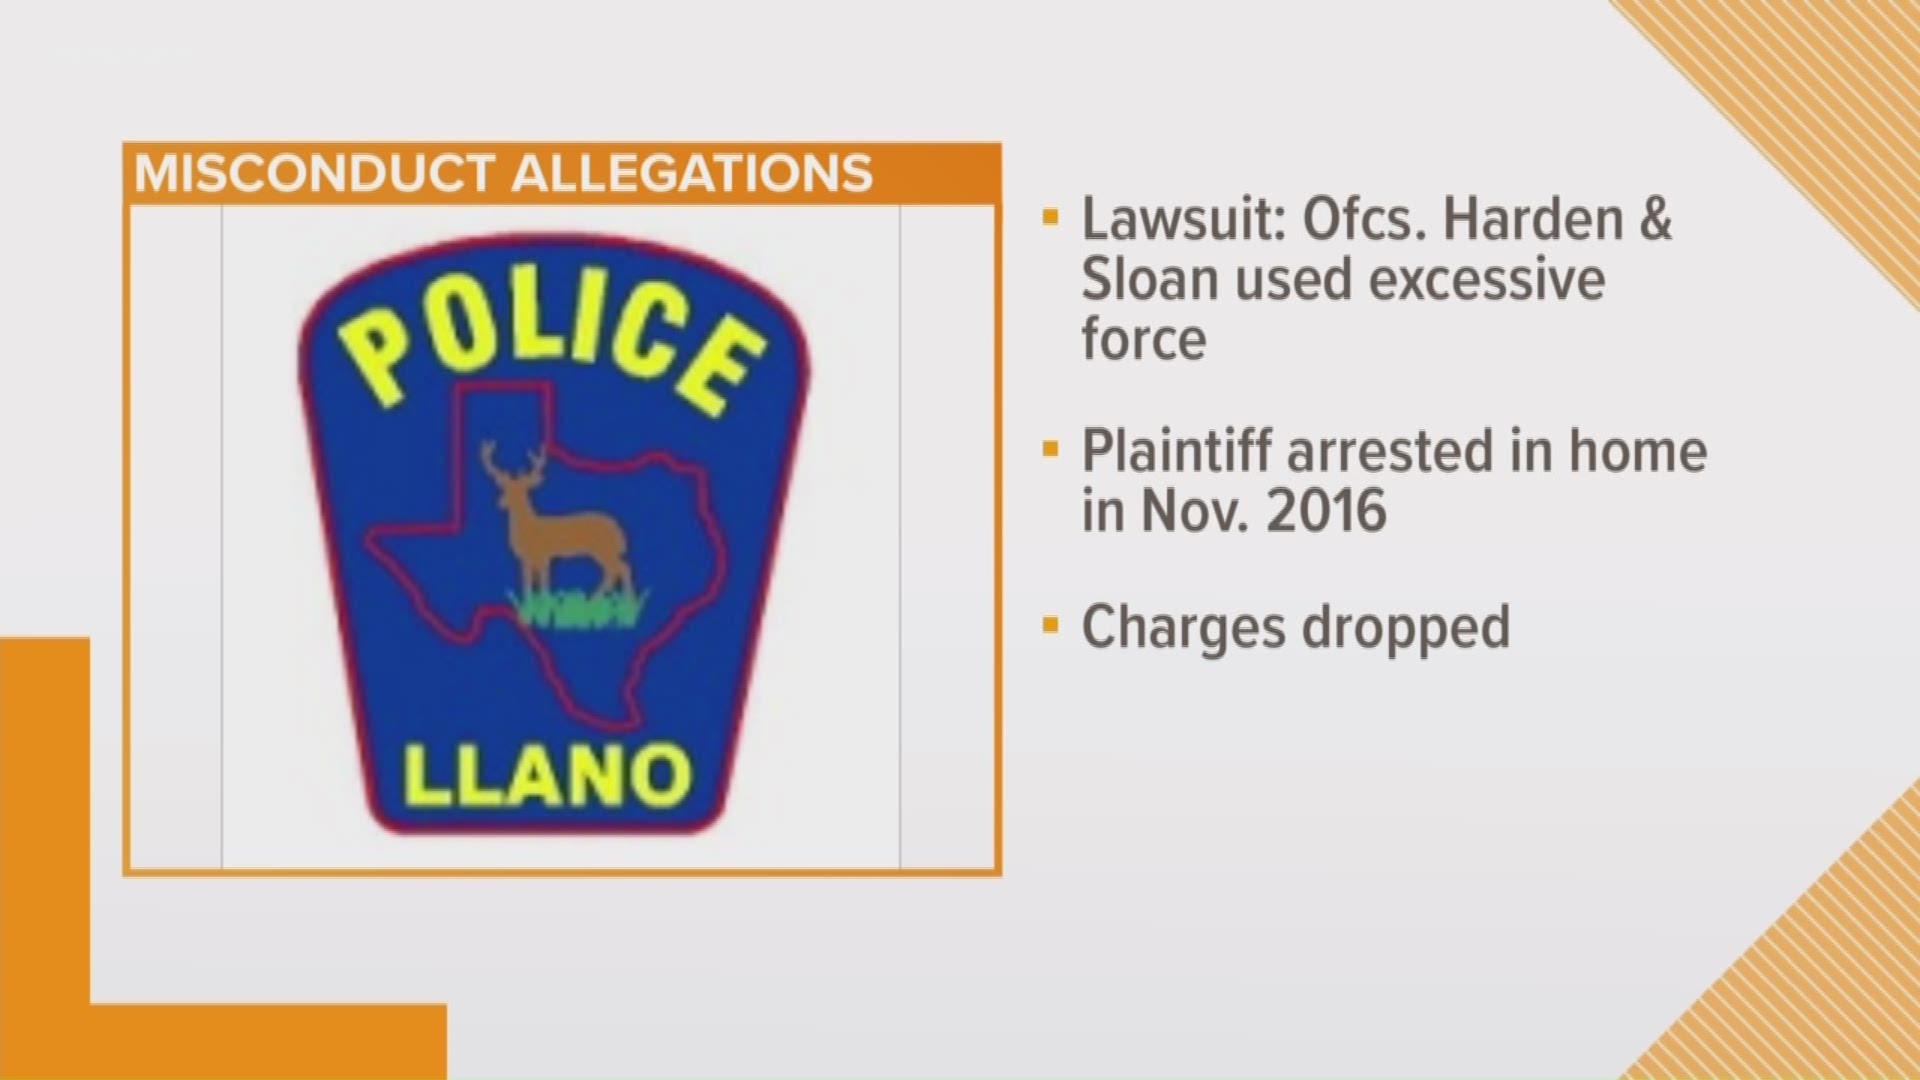 New lawsuit filed against Llano police officers